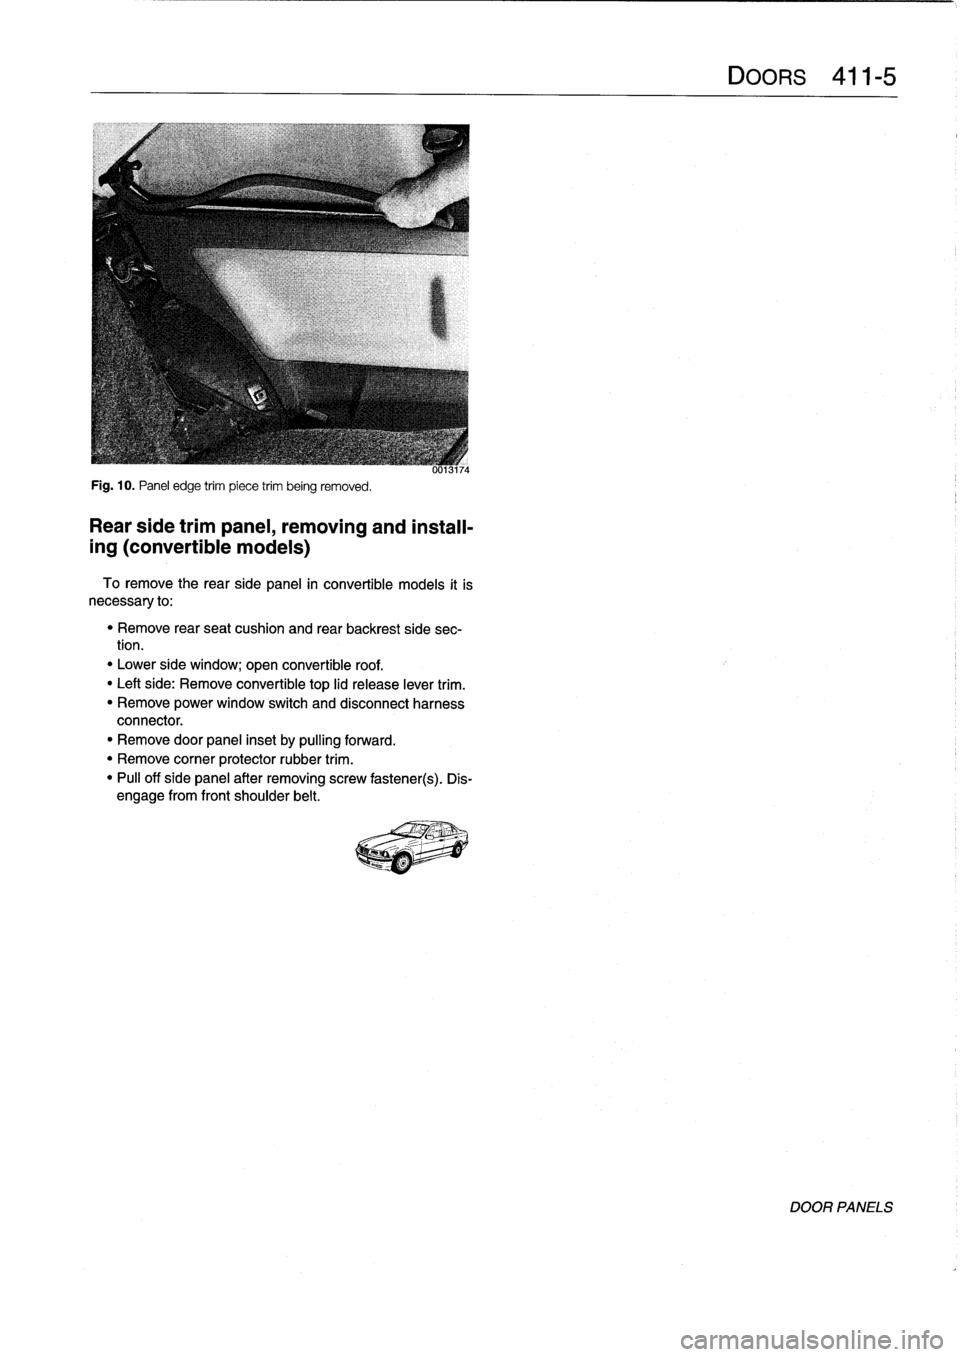 BMW 323i 1995 E36 Workshop Manual 
Fig
.
10
.
Panel
edge
trim
piece
trim
being
removed
.

Rear
side
trimpanel,
removing
and
install-

ing
(convertible
models)

To
remove
the
rearside
panel
in
convertible
models
it
is
necessary
to
:

"